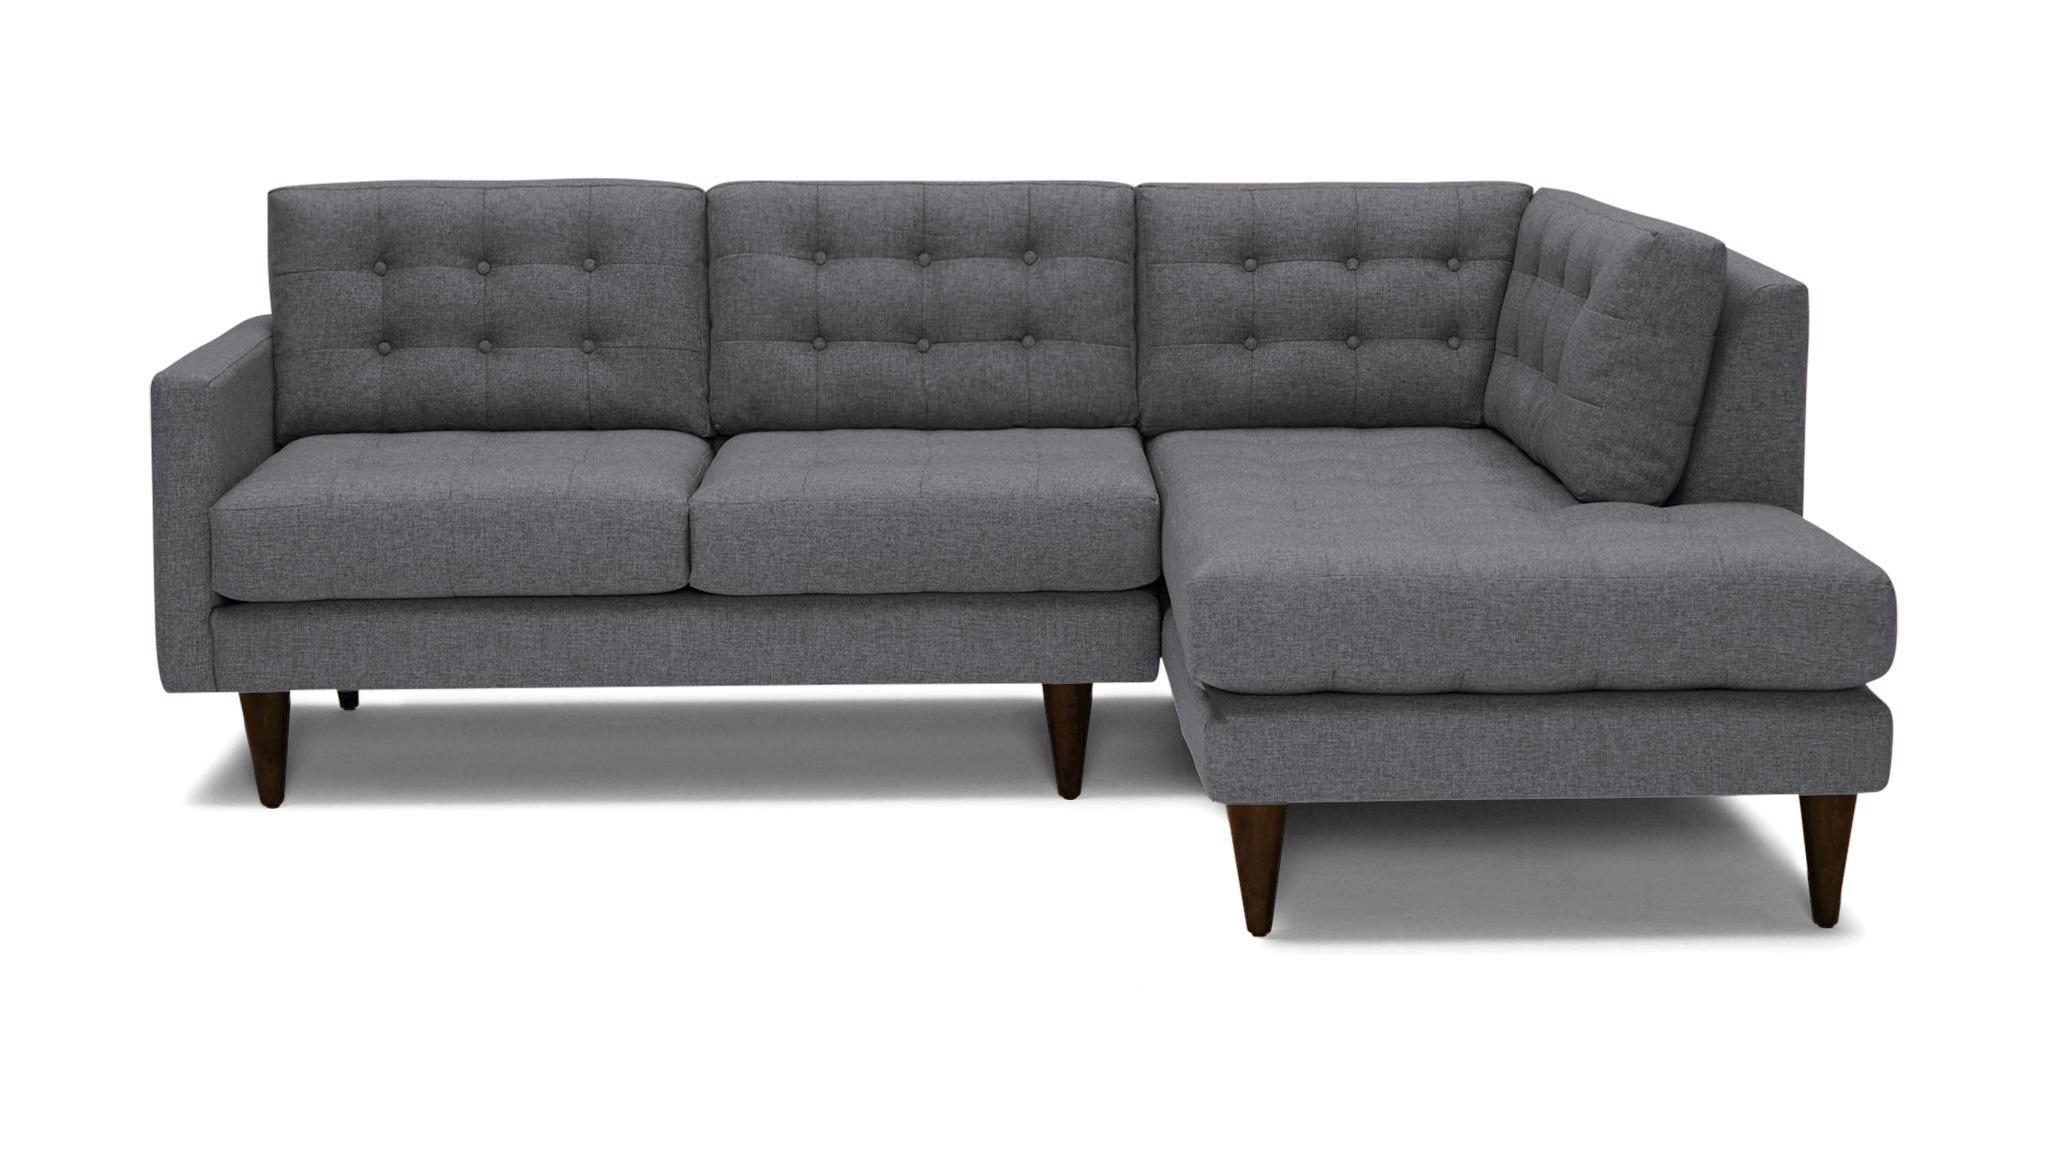 Gray Eliot Mid Century Modern Apartment Sectional with Bumper - Essence Ash - Mocha - Right  - Image 4